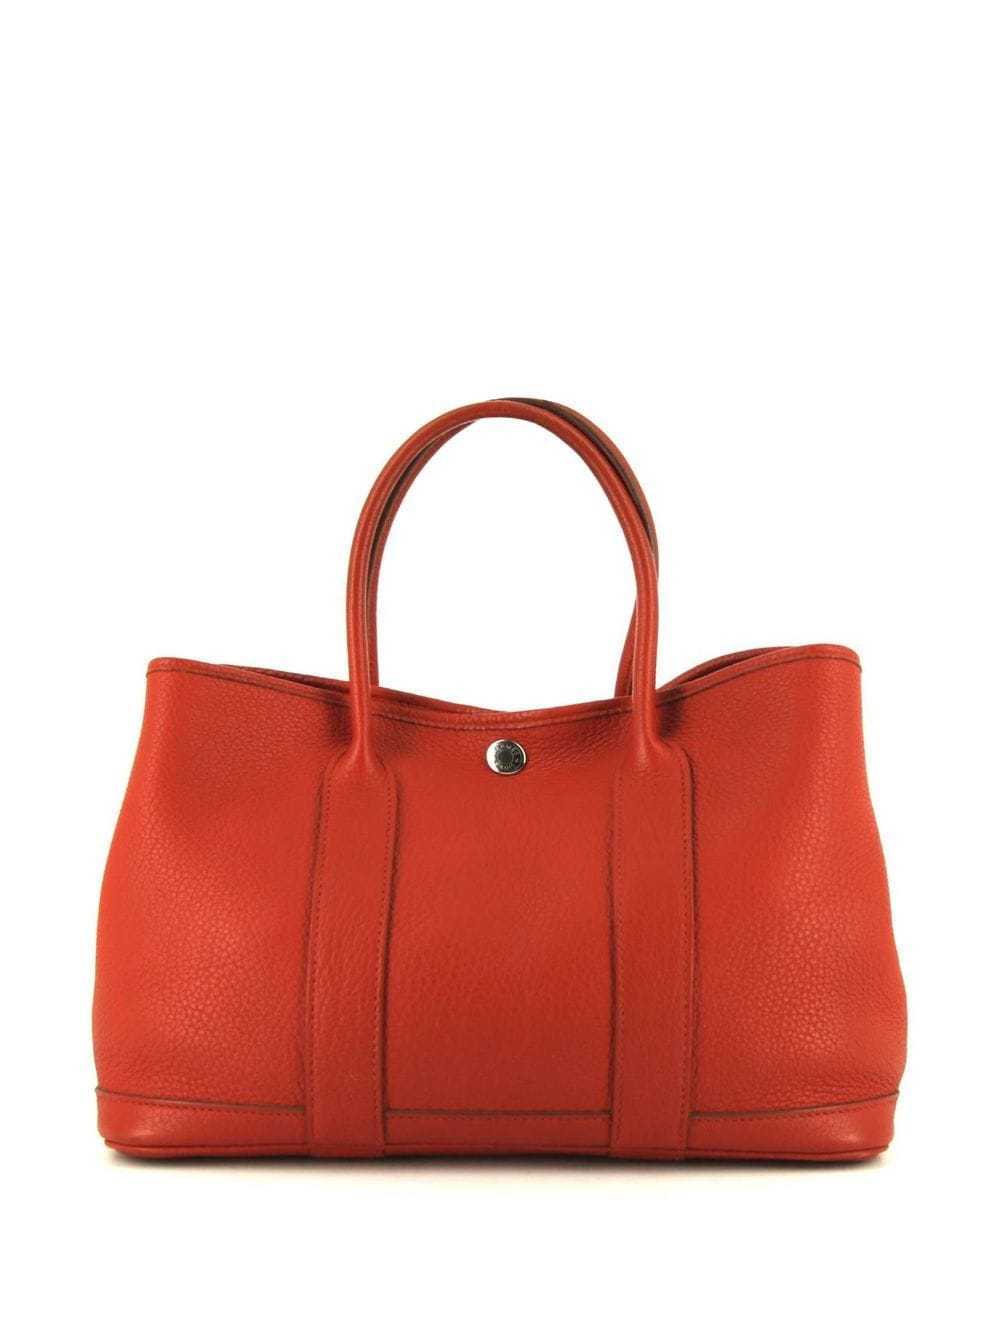 Hermès Pre-Owned 2013 Garden Party tote bag - Red - image 2